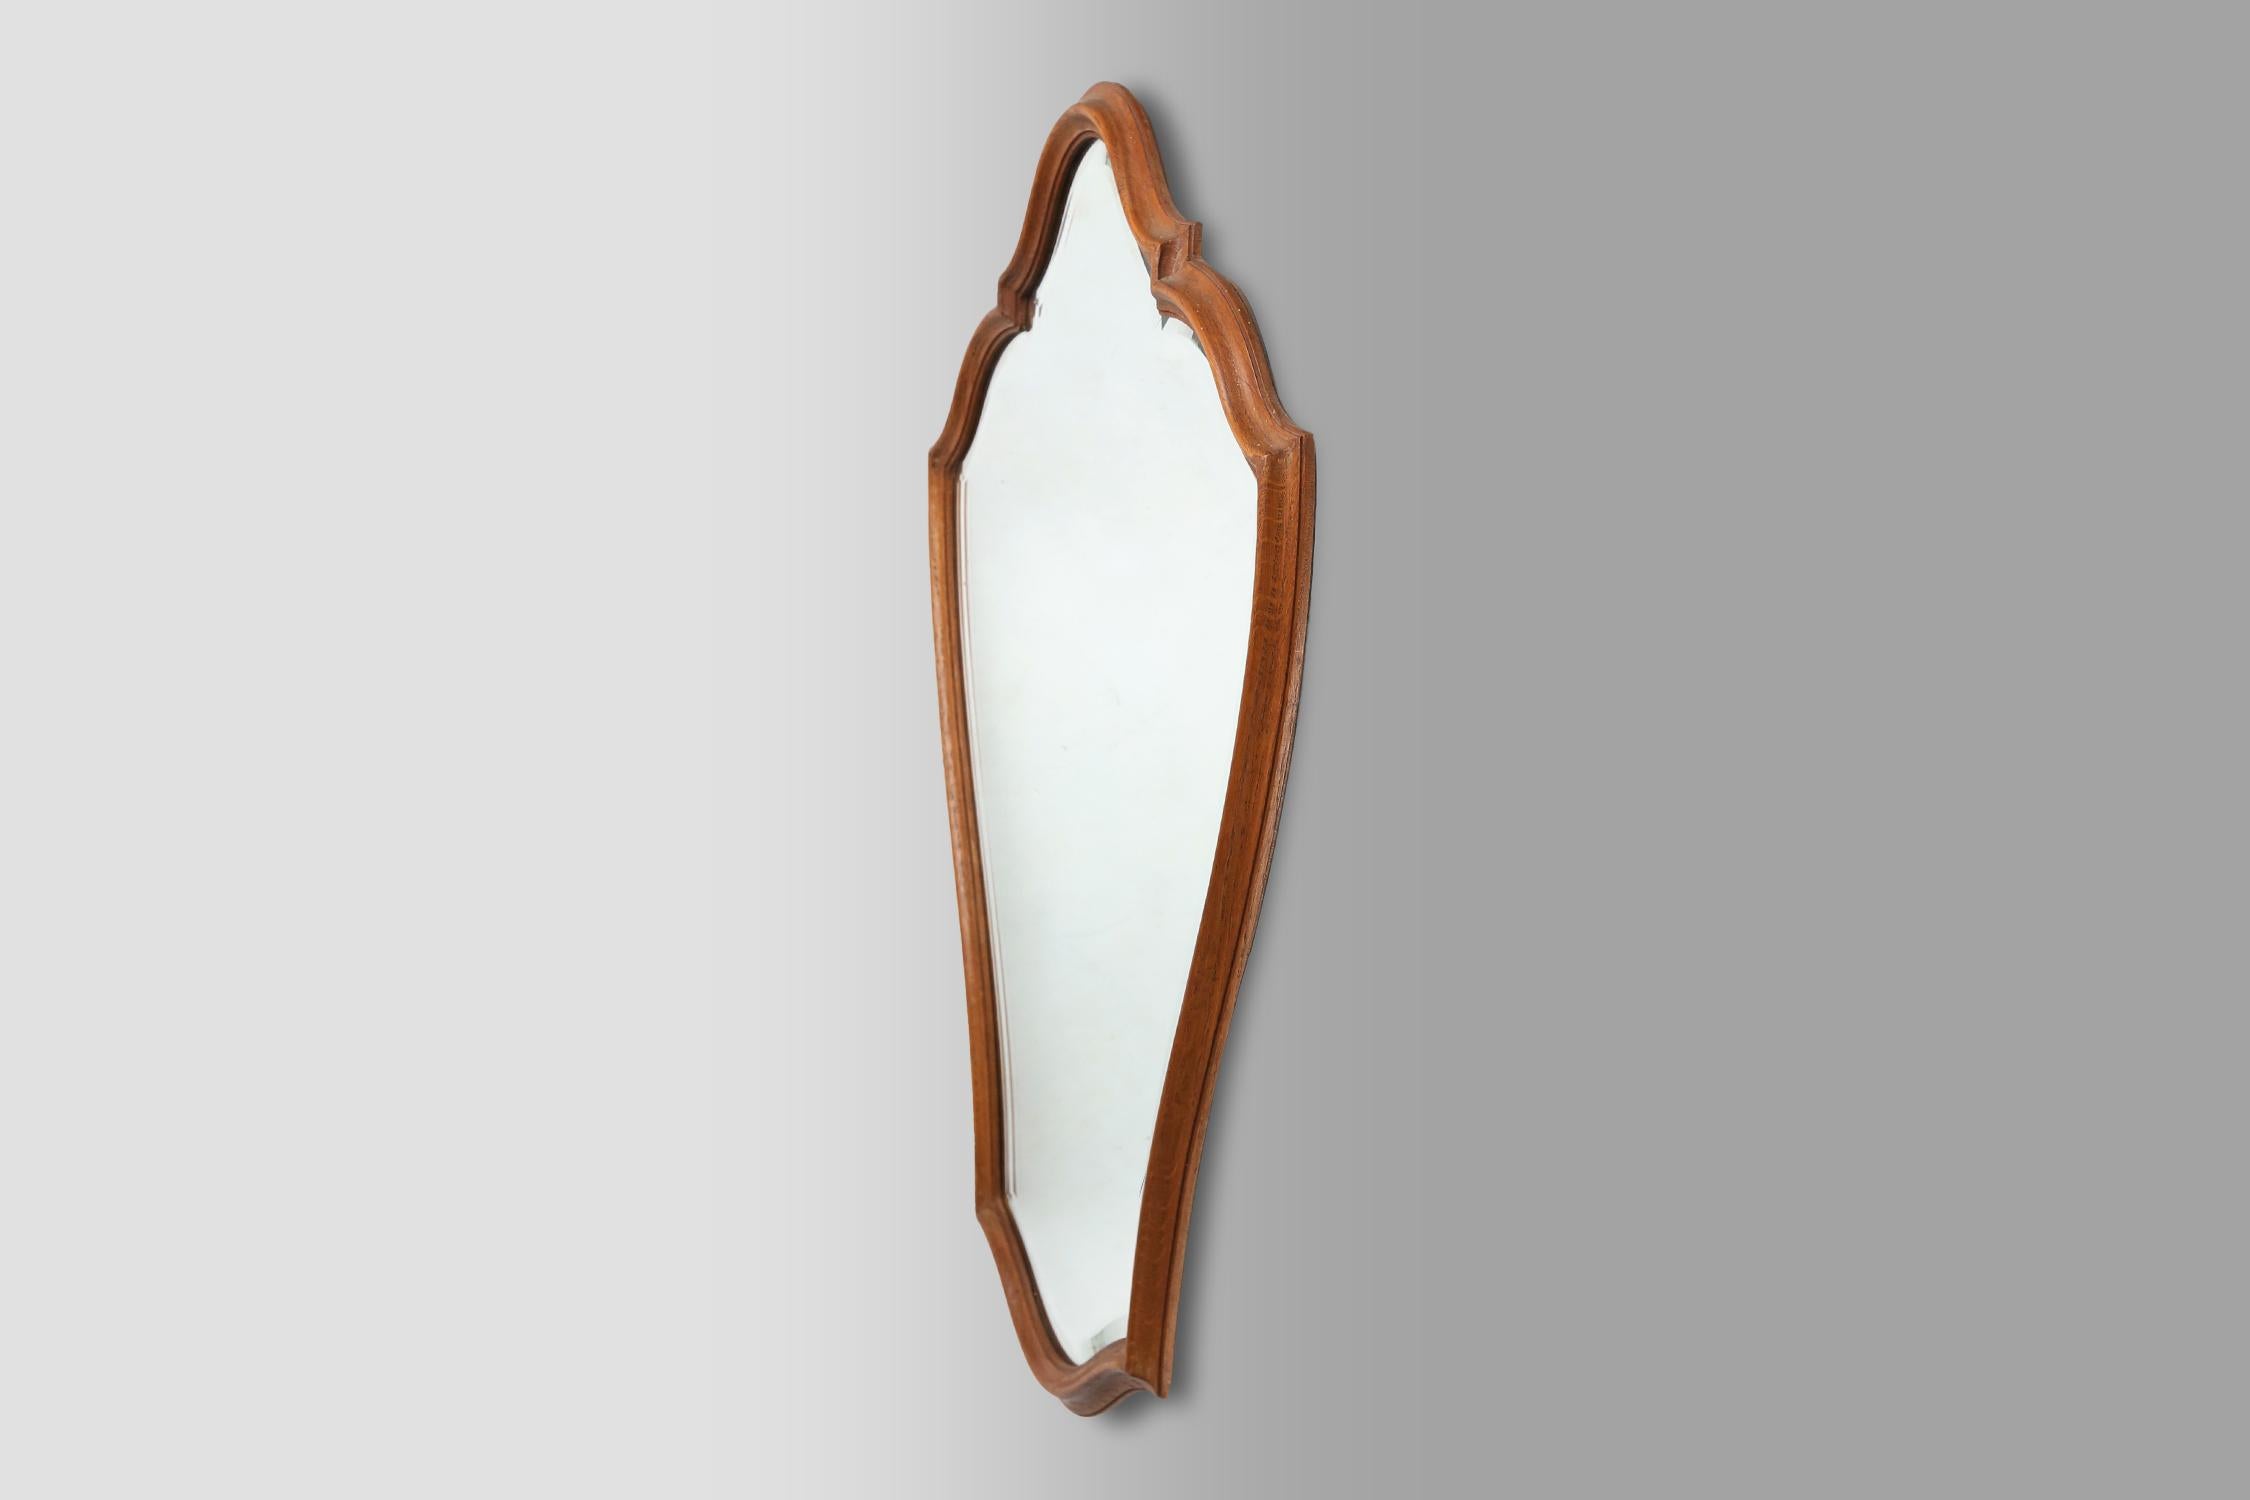 France / 1950s / carved wooden mirror / mid-century / vintage design

Organic lined wooden mirror with intricate details from the 1950s, designed and made in France. With a timeless design and size, this mirror with luxurious cut mirror glass exudes